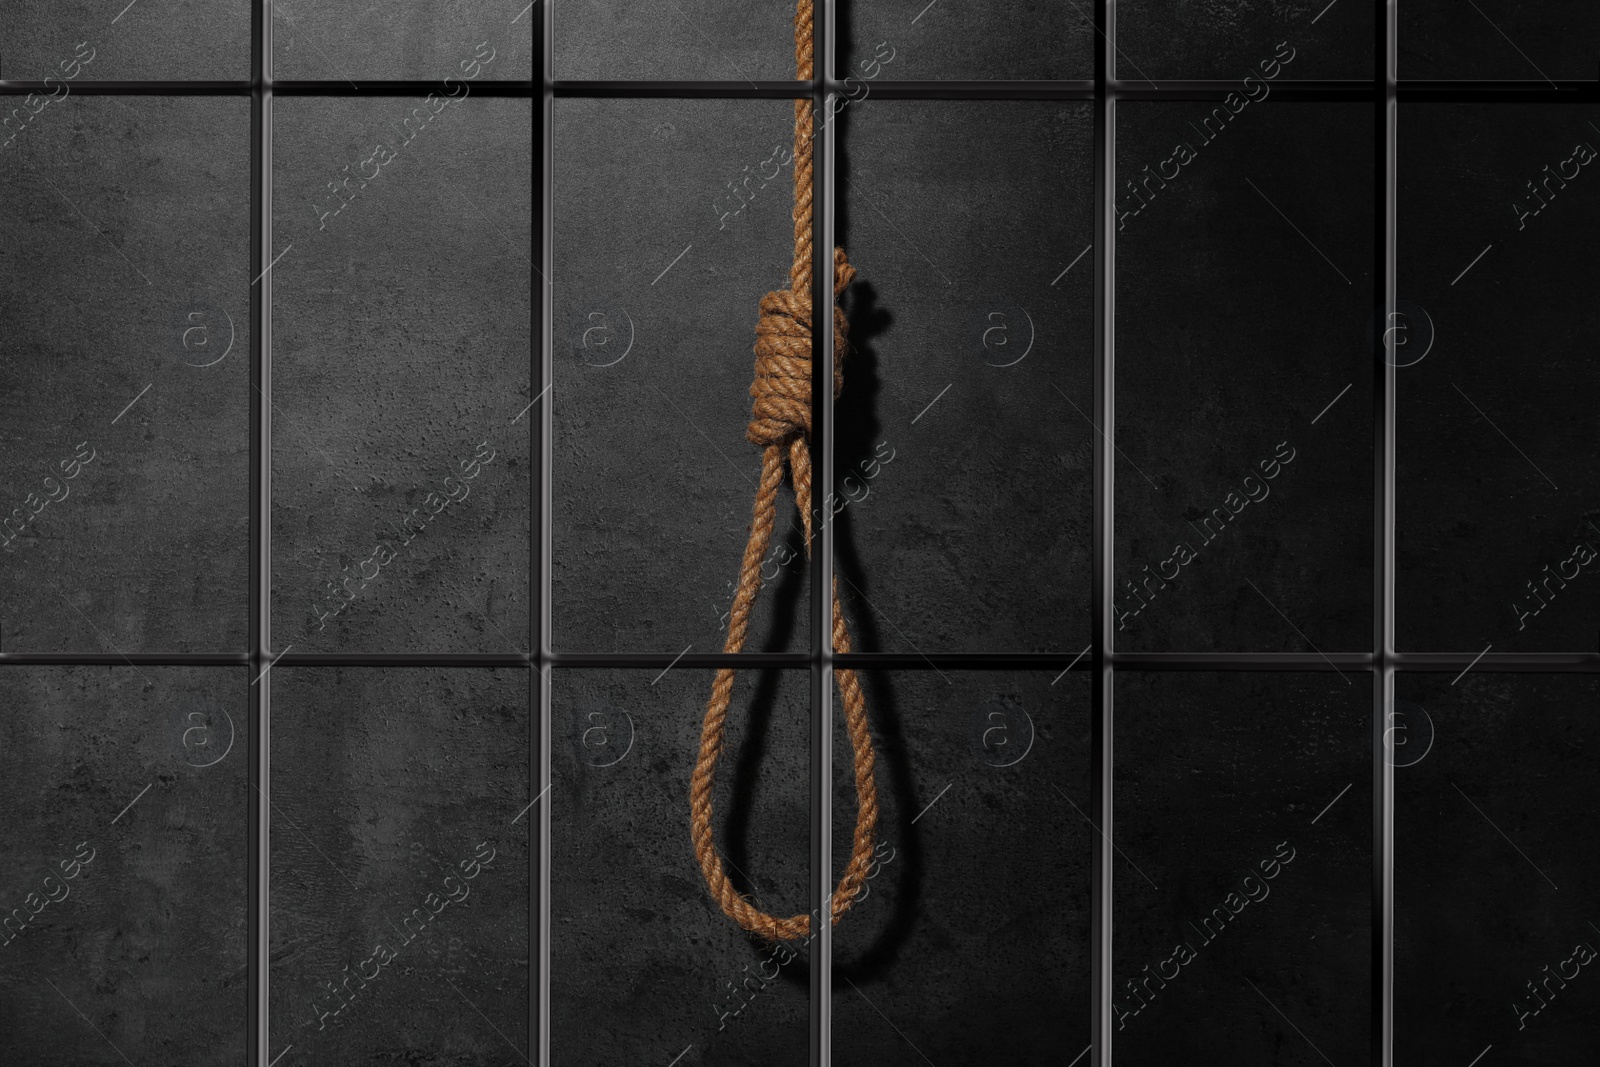 Image of Rope noose with knot in prison cell